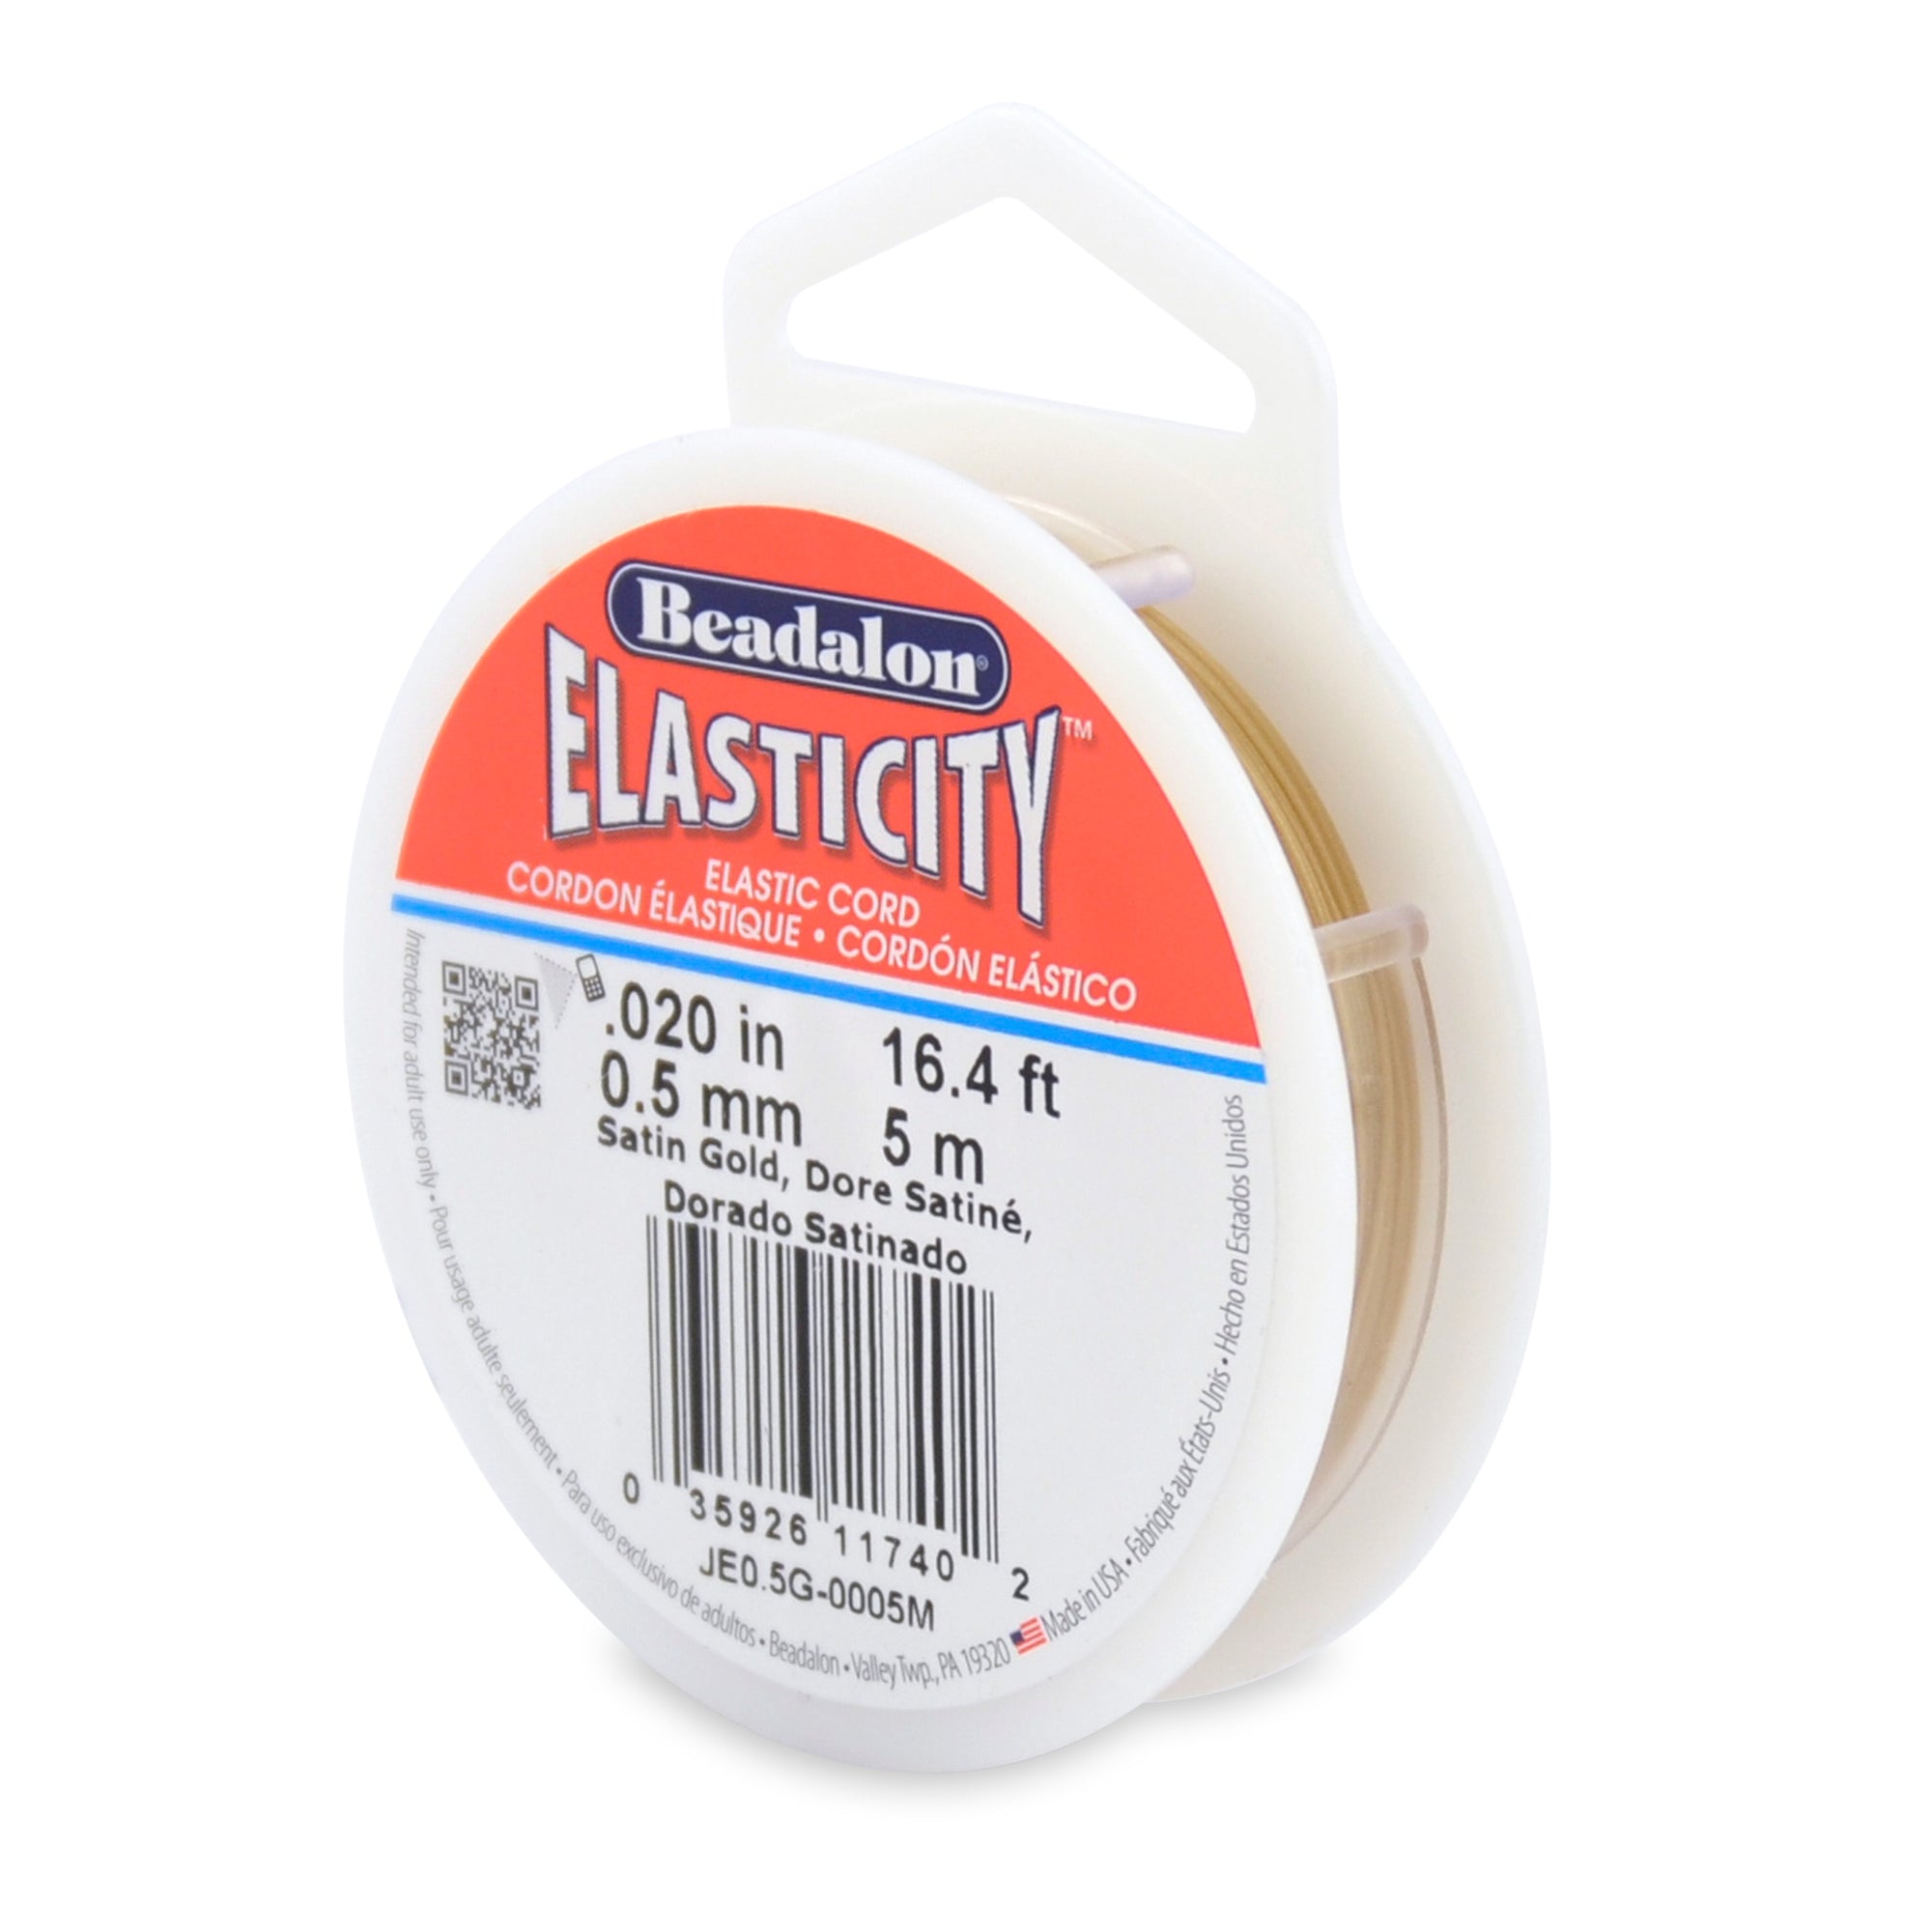 Elasticity Stretch Cord, 0.5 mm / .020 in, Satin Gold, 5 meter